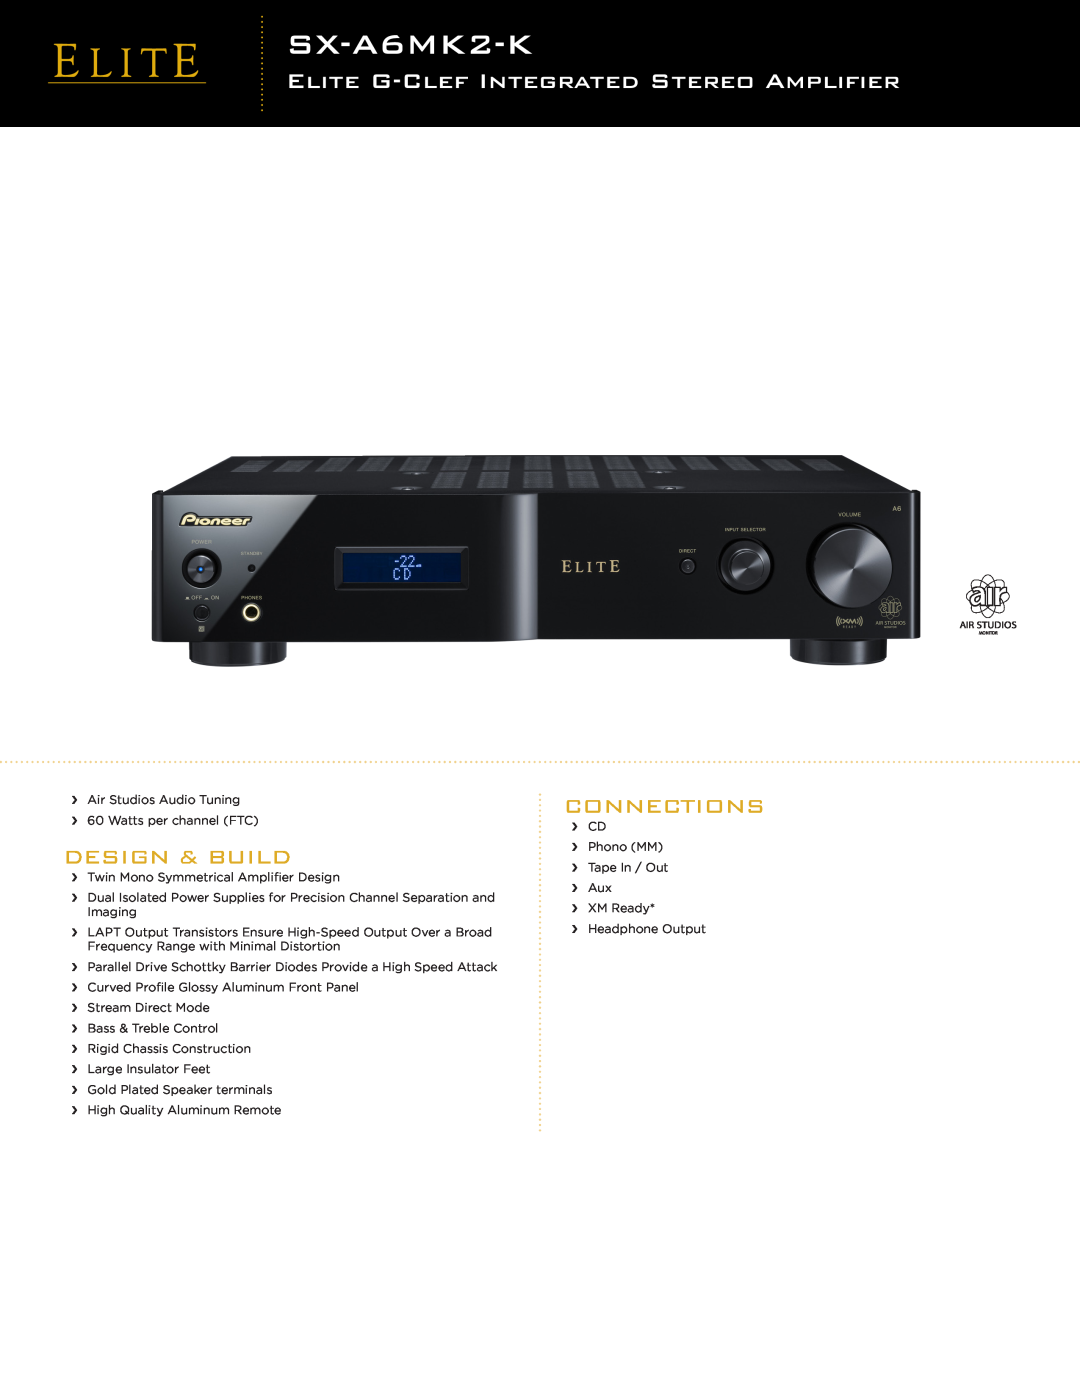 Pioneer SX-A6MK2-K manual Elite G-Clefintegrated Stereo Amplifier, Design & Build, Connections 